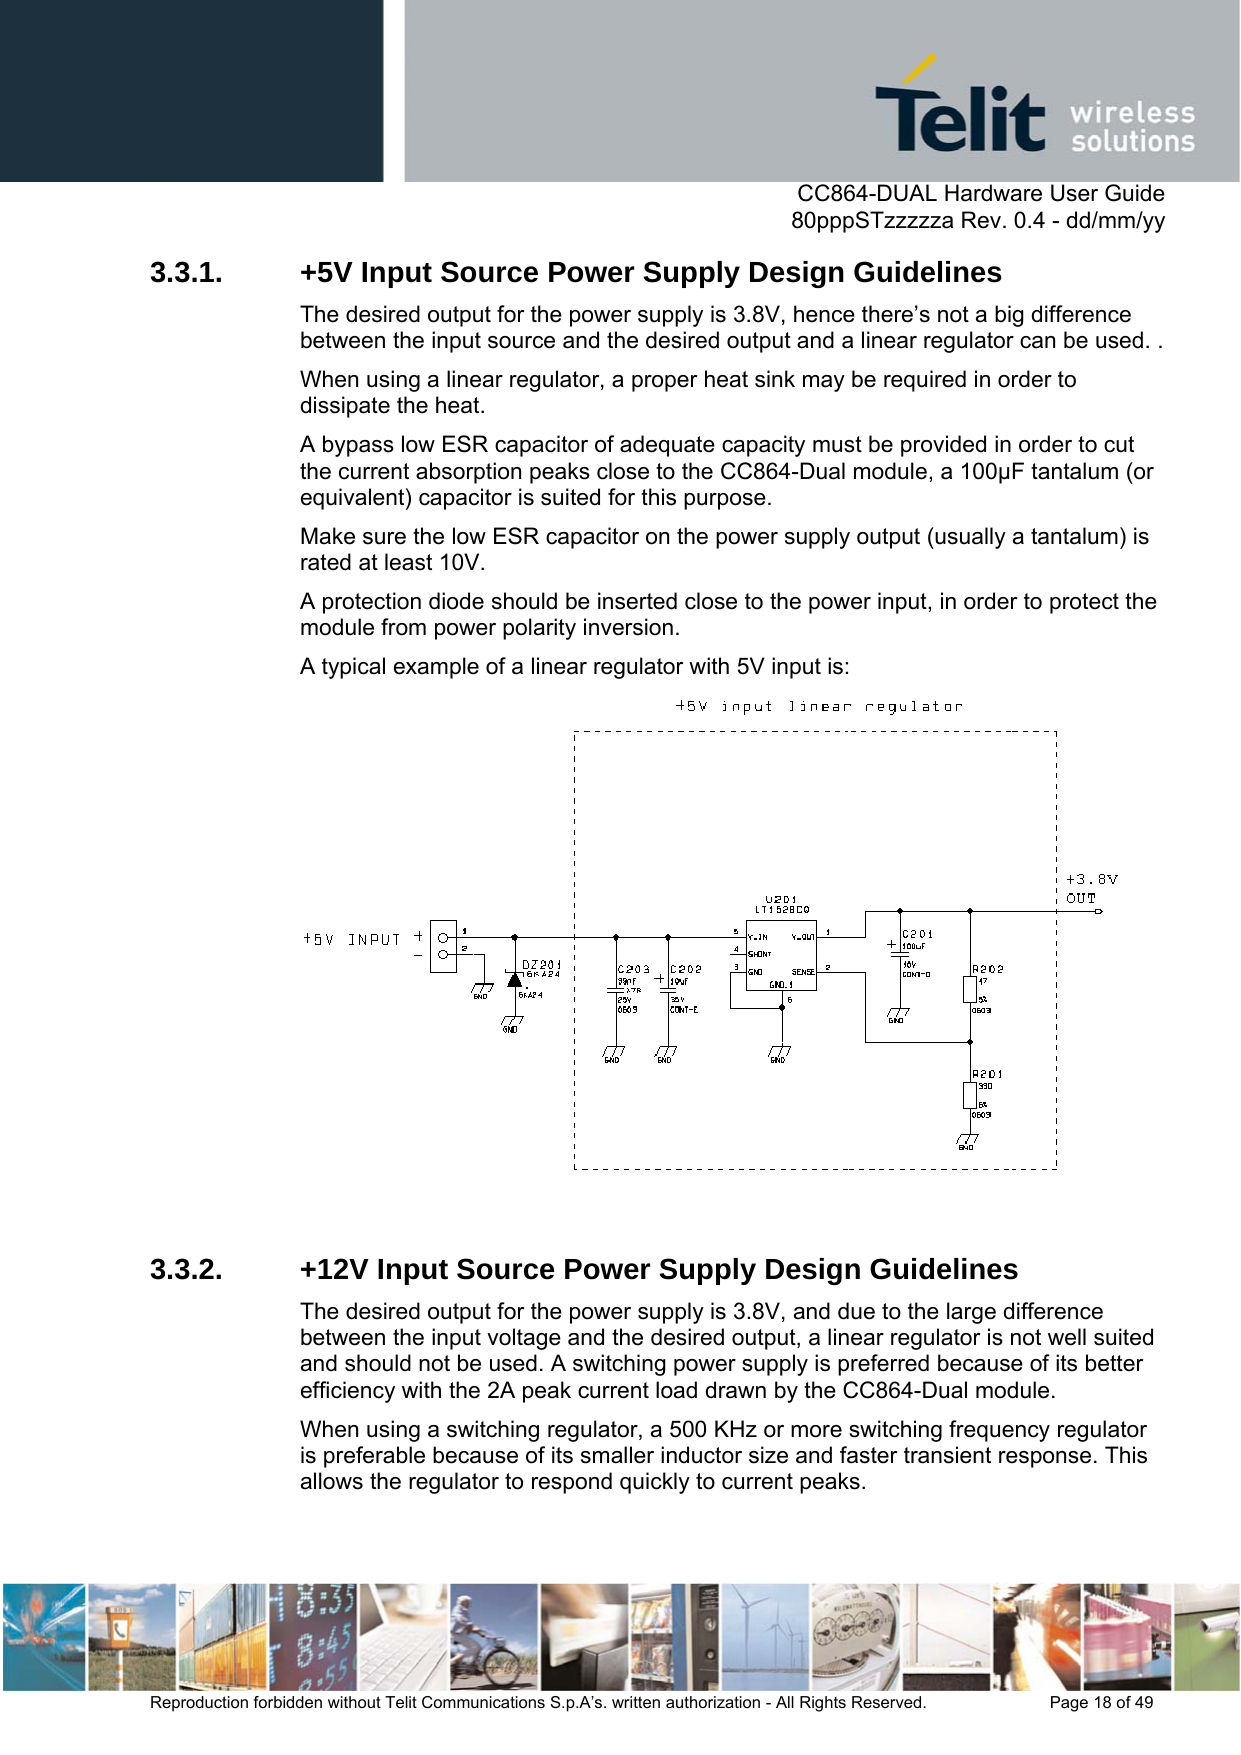      CC864-DUAL Hardware User Guide   80pppSTzzzzza Rev. 0.4 - dd/mm/yy   Reproduction forbidden without Telit Communications S.p.A’s. written authorization - All Rights Reserved.    Page 18 of 49  3.3.1.  +5V Input Source Power Supply Design Guidelines The desired output for the power supply is 3.8V, hence there’s not a big difference between the input source and the desired output and a linear regulator can be used. . When using a linear regulator, a proper heat sink may be required in order to dissipate the heat. A bypass low ESR capacitor of adequate capacity must be provided in order to cut the current absorption peaks close to the CC864-Dual module, a 100µF tantalum (or equivalent) capacitor is suited for this purpose.  Make sure the low ESR capacitor on the power supply output (usually a tantalum) is rated at least 10V. A protection diode should be inserted close to the power input, in order to protect the module from power polarity inversion.  A typical example of a linear regulator with 5V input is:   3.3.2.  +12V Input Source Power Supply Design Guidelines The desired output for the power supply is 3.8V, and due to the large difference between the input voltage and the desired output, a linear regulator is not well suited and should not be used. A switching power supply is preferred because of its better efficiency with the 2A peak current load drawn by the CC864-Dual module. When using a switching regulator, a 500 KHz or more switching frequency regulator is preferable because of its smaller inductor size and faster transient response. This allows the regulator to respond quickly to current peaks. 